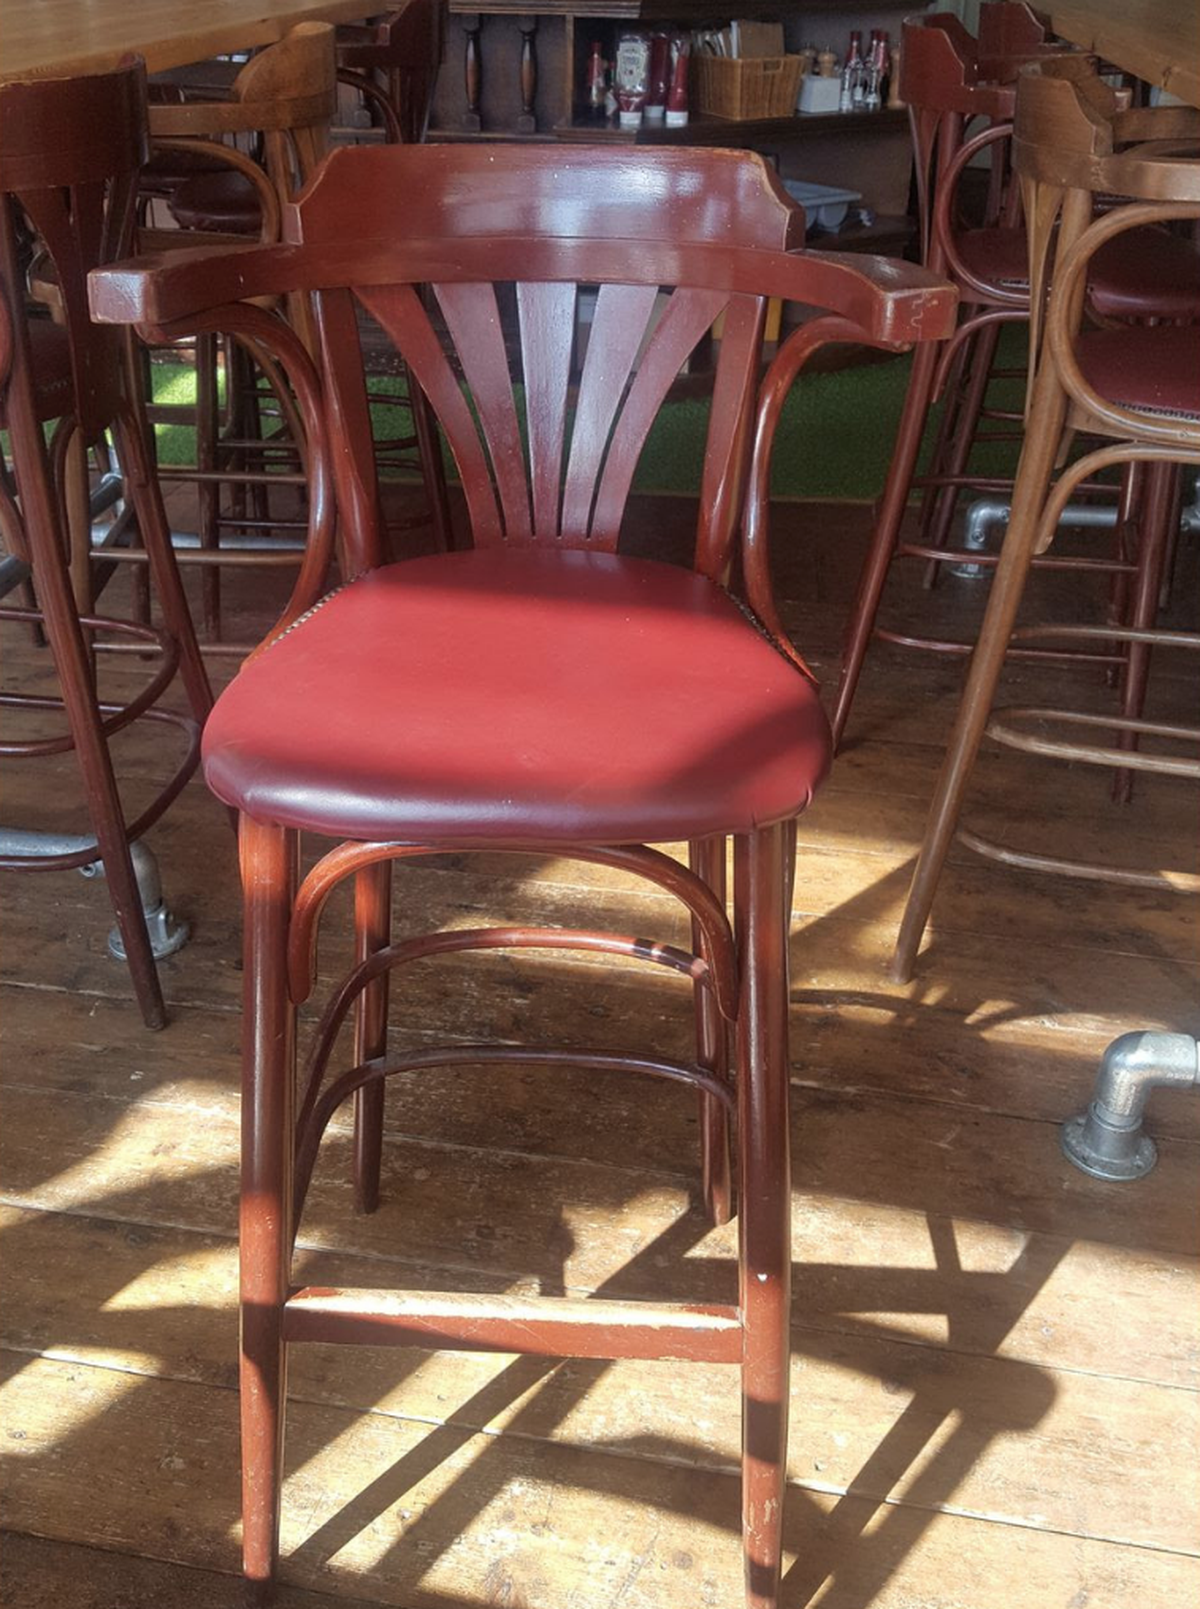 Secondhand Chairs and Tables | Pub and Bar Furniture | 6x Bentwood